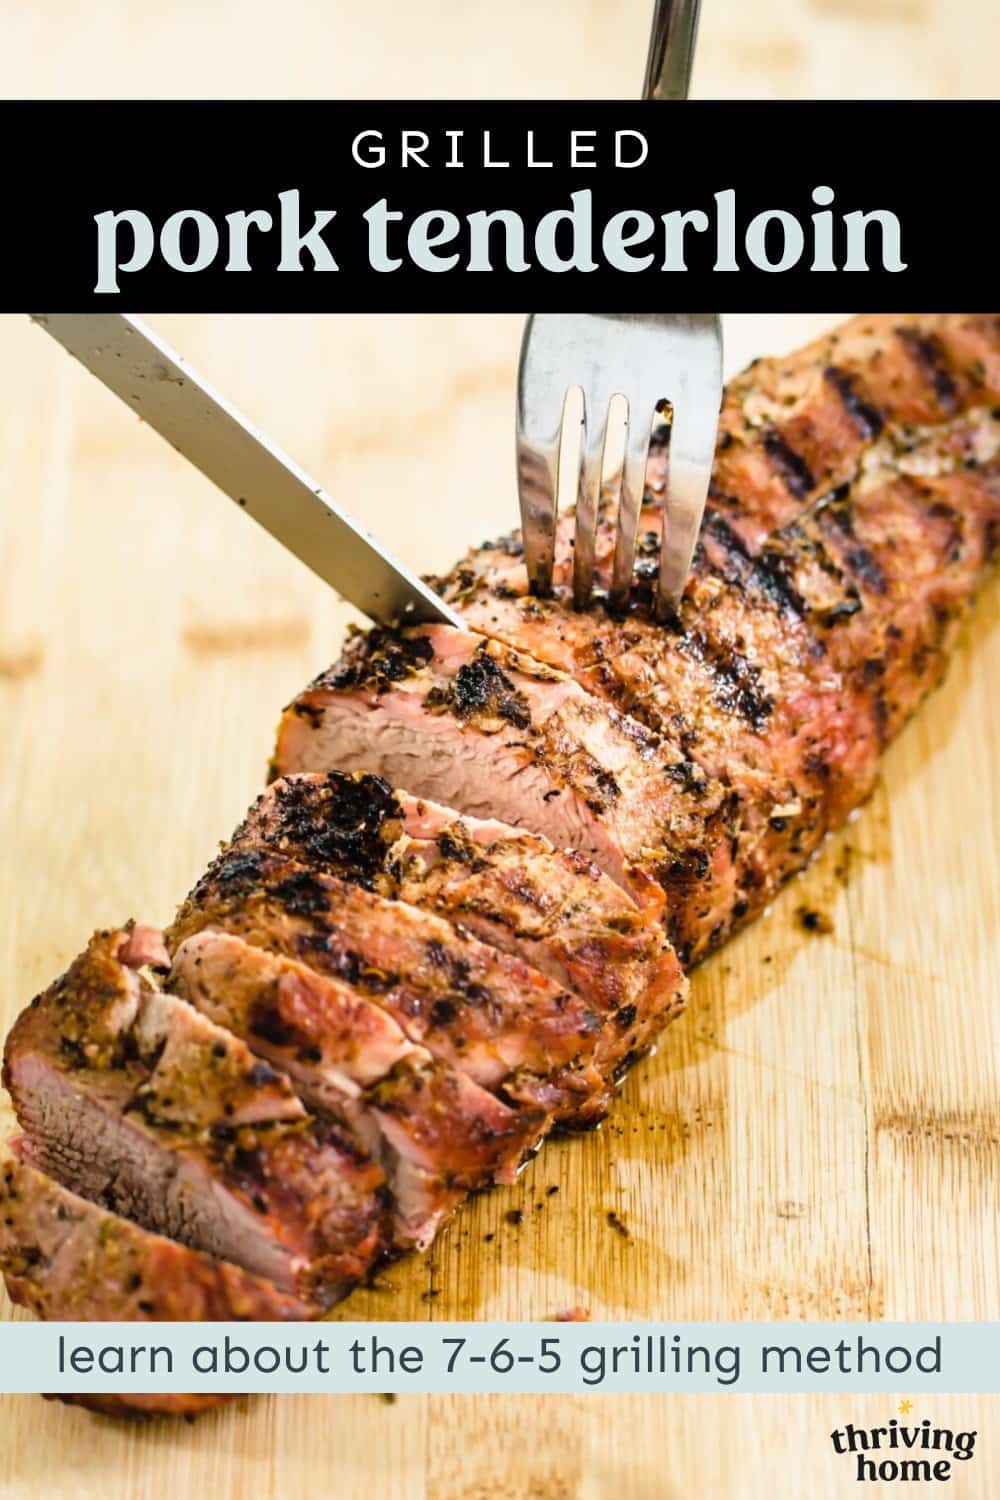 Grilled pork tenderloin on a wooden cutting board being sliced with a fork and knife.